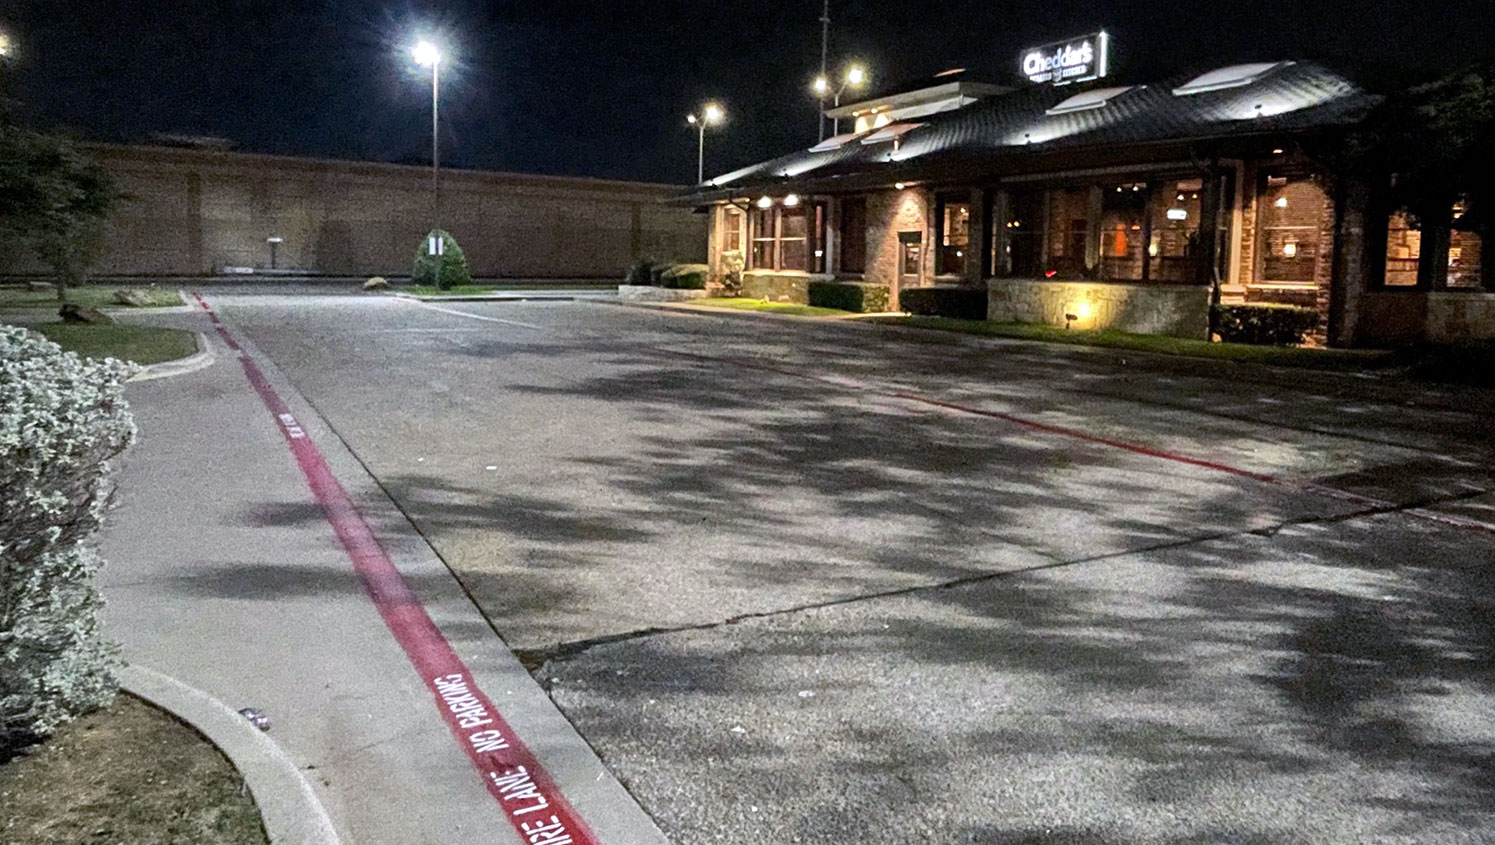 updated fire lane striping at cheddar’s scratch kitchen